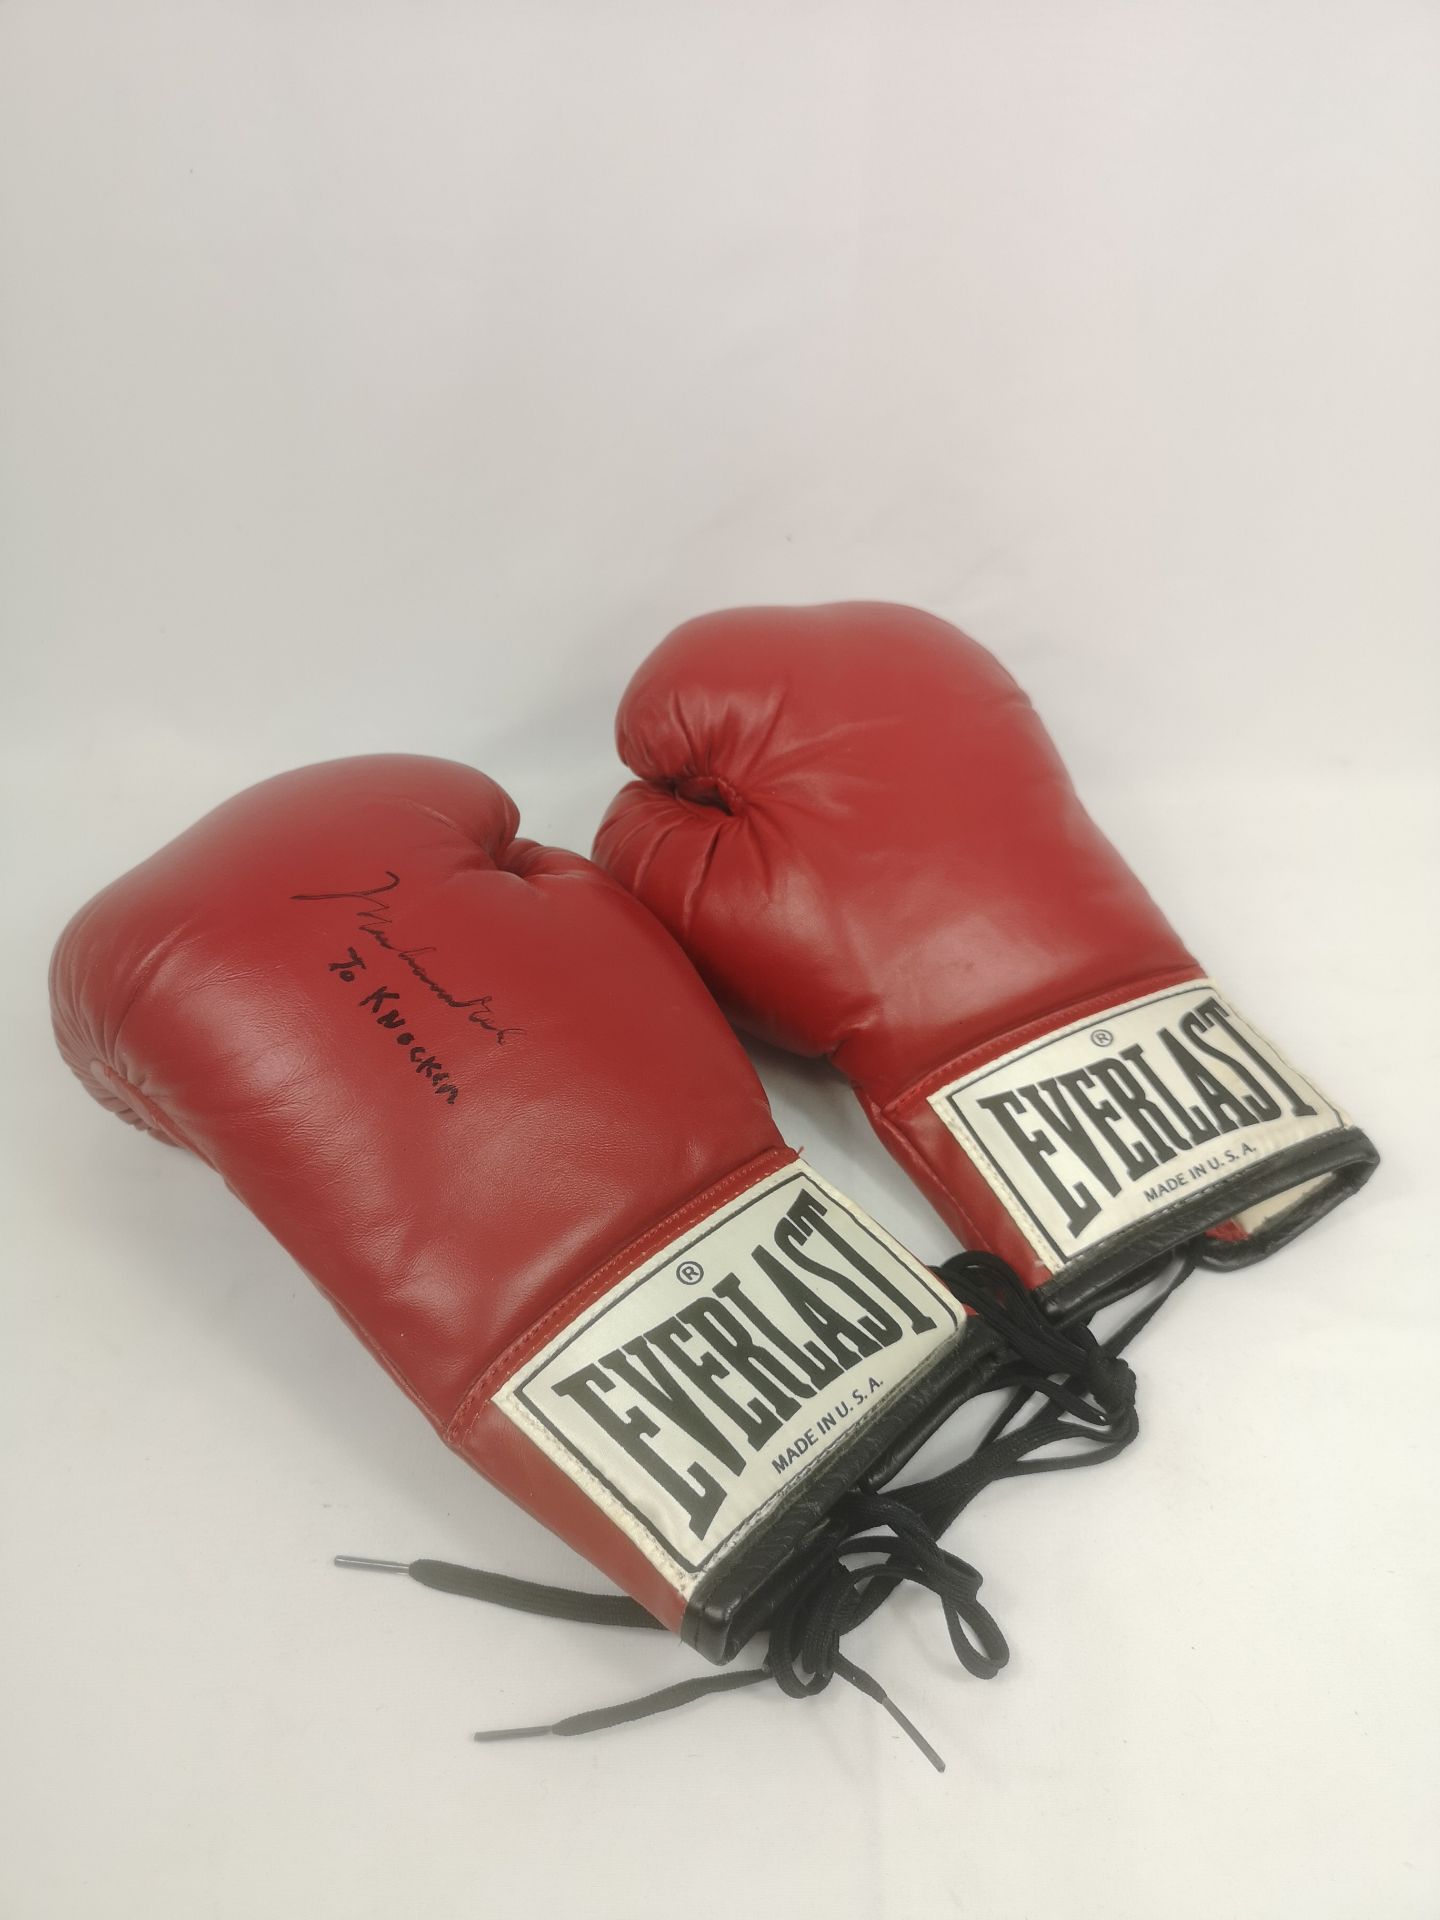 Pair of Everlast boxing gloves signed by Muhammad Ali